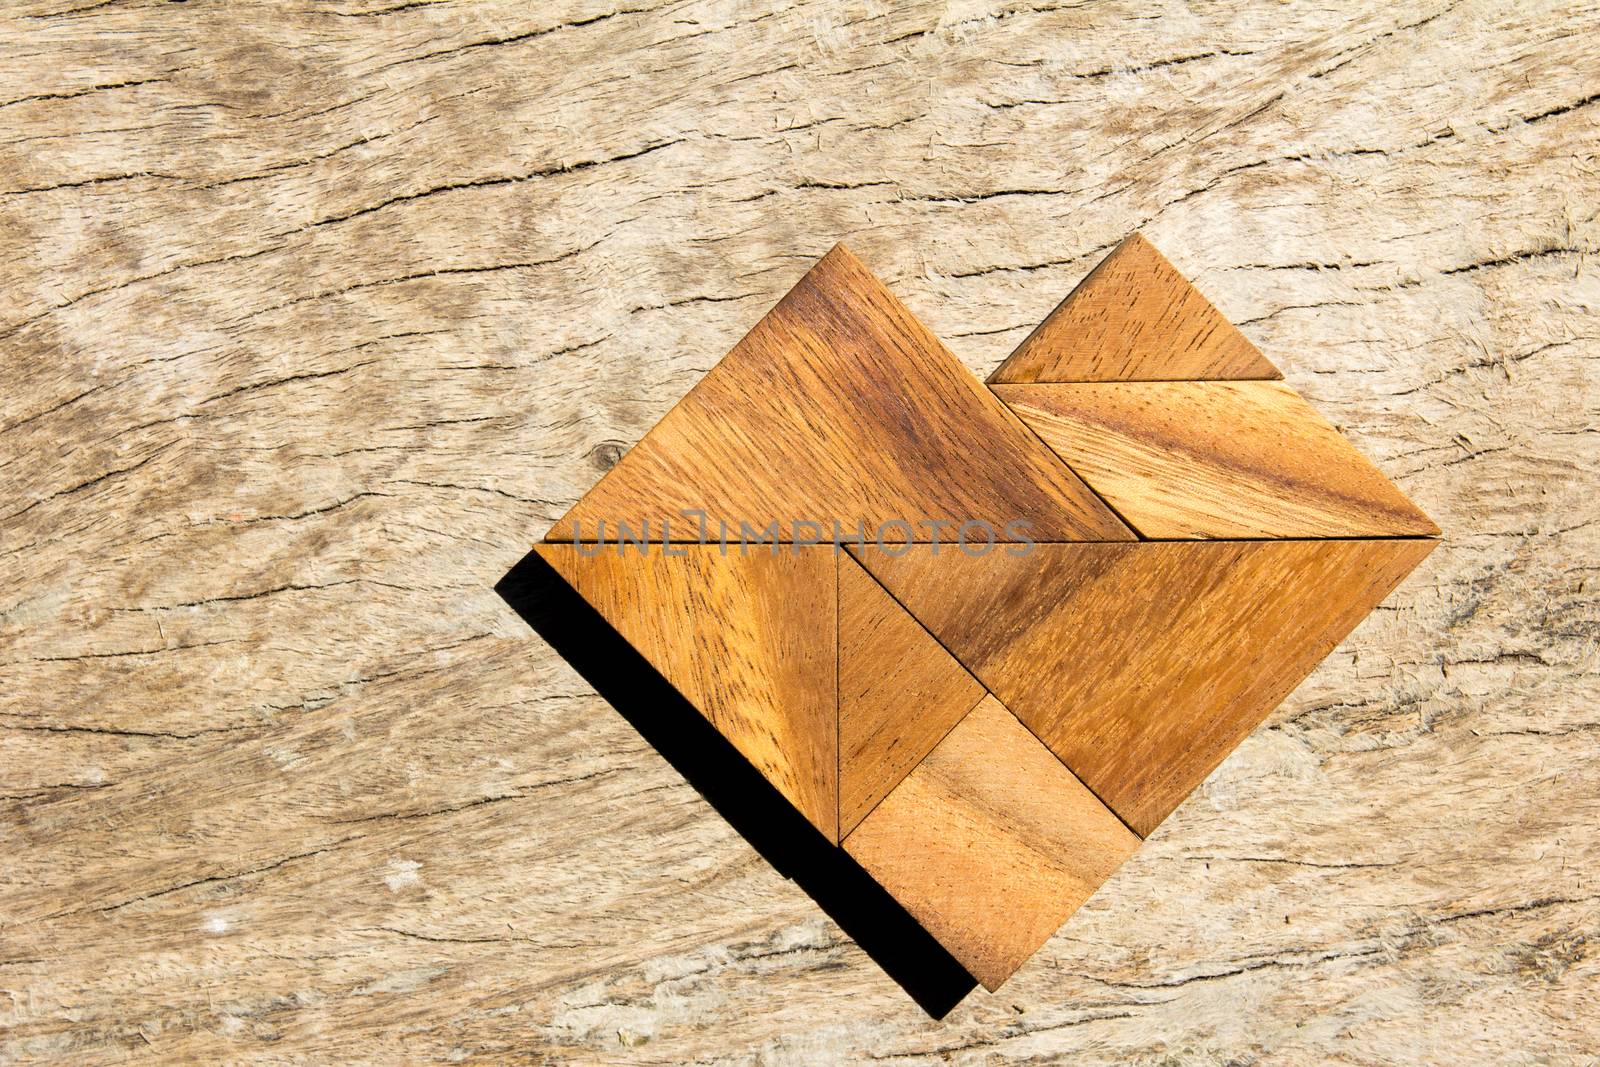 Tangram puzzle in heart shape on wooden background by Hengpattanapong